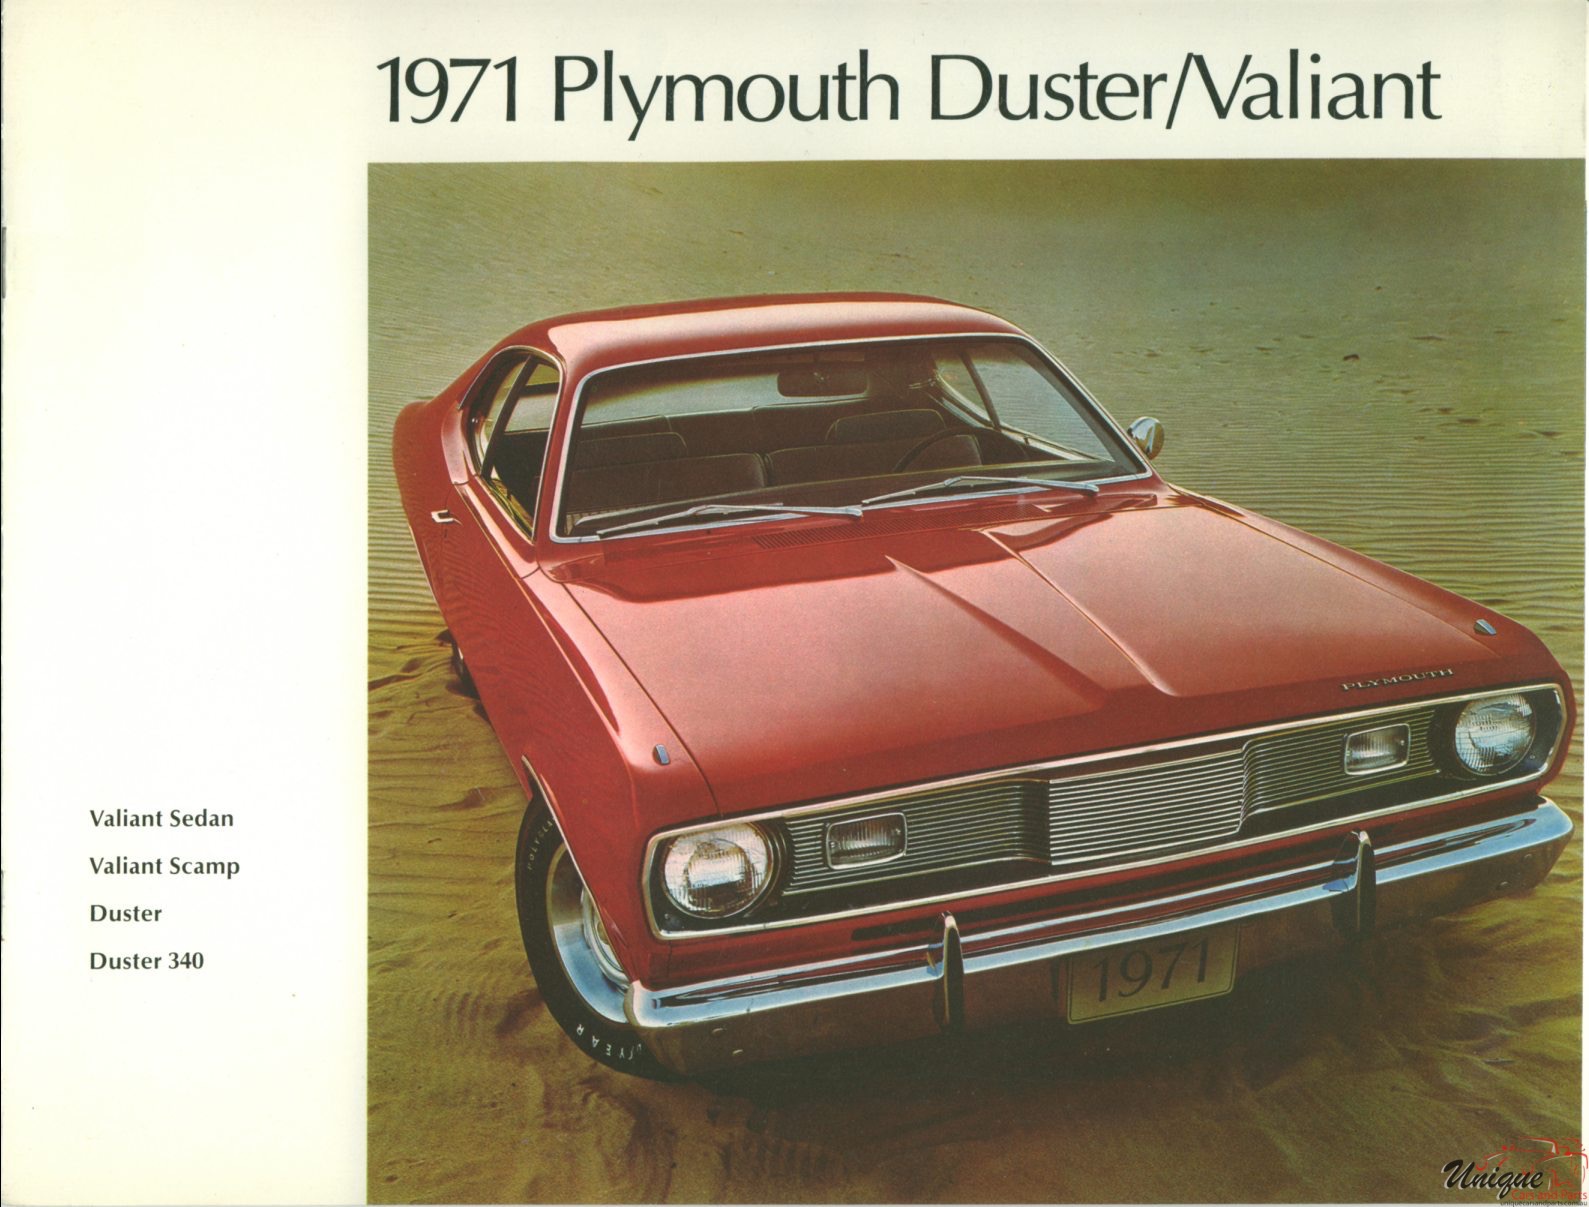 1971 Plymouth Duster-Valiant Brochure Page 3